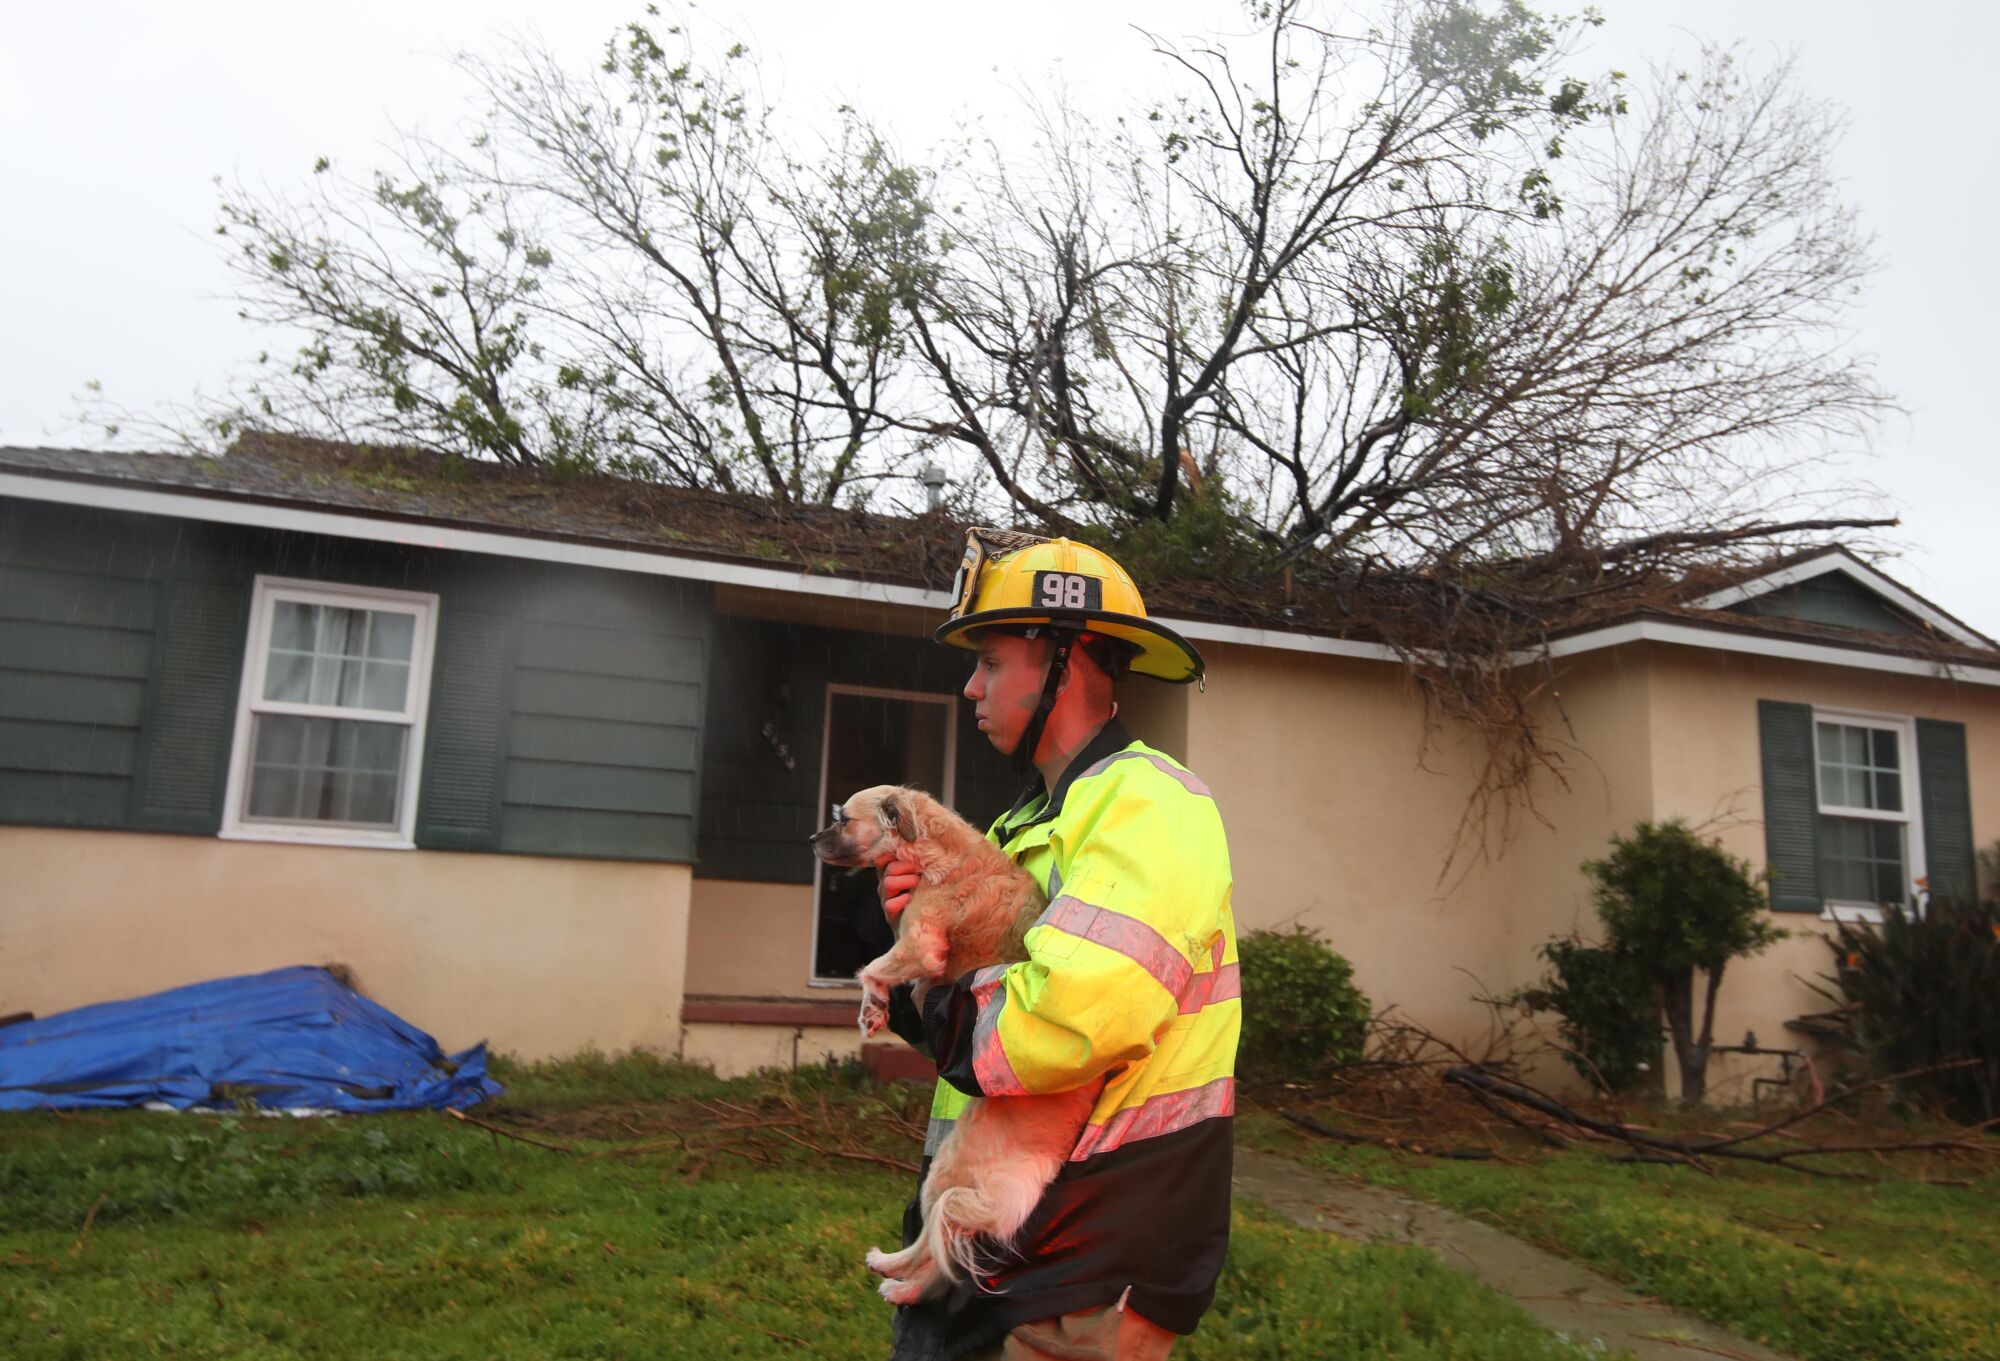 A LAFD firefighter helps evacuate a dog from a storm damaged home in Panorama City.